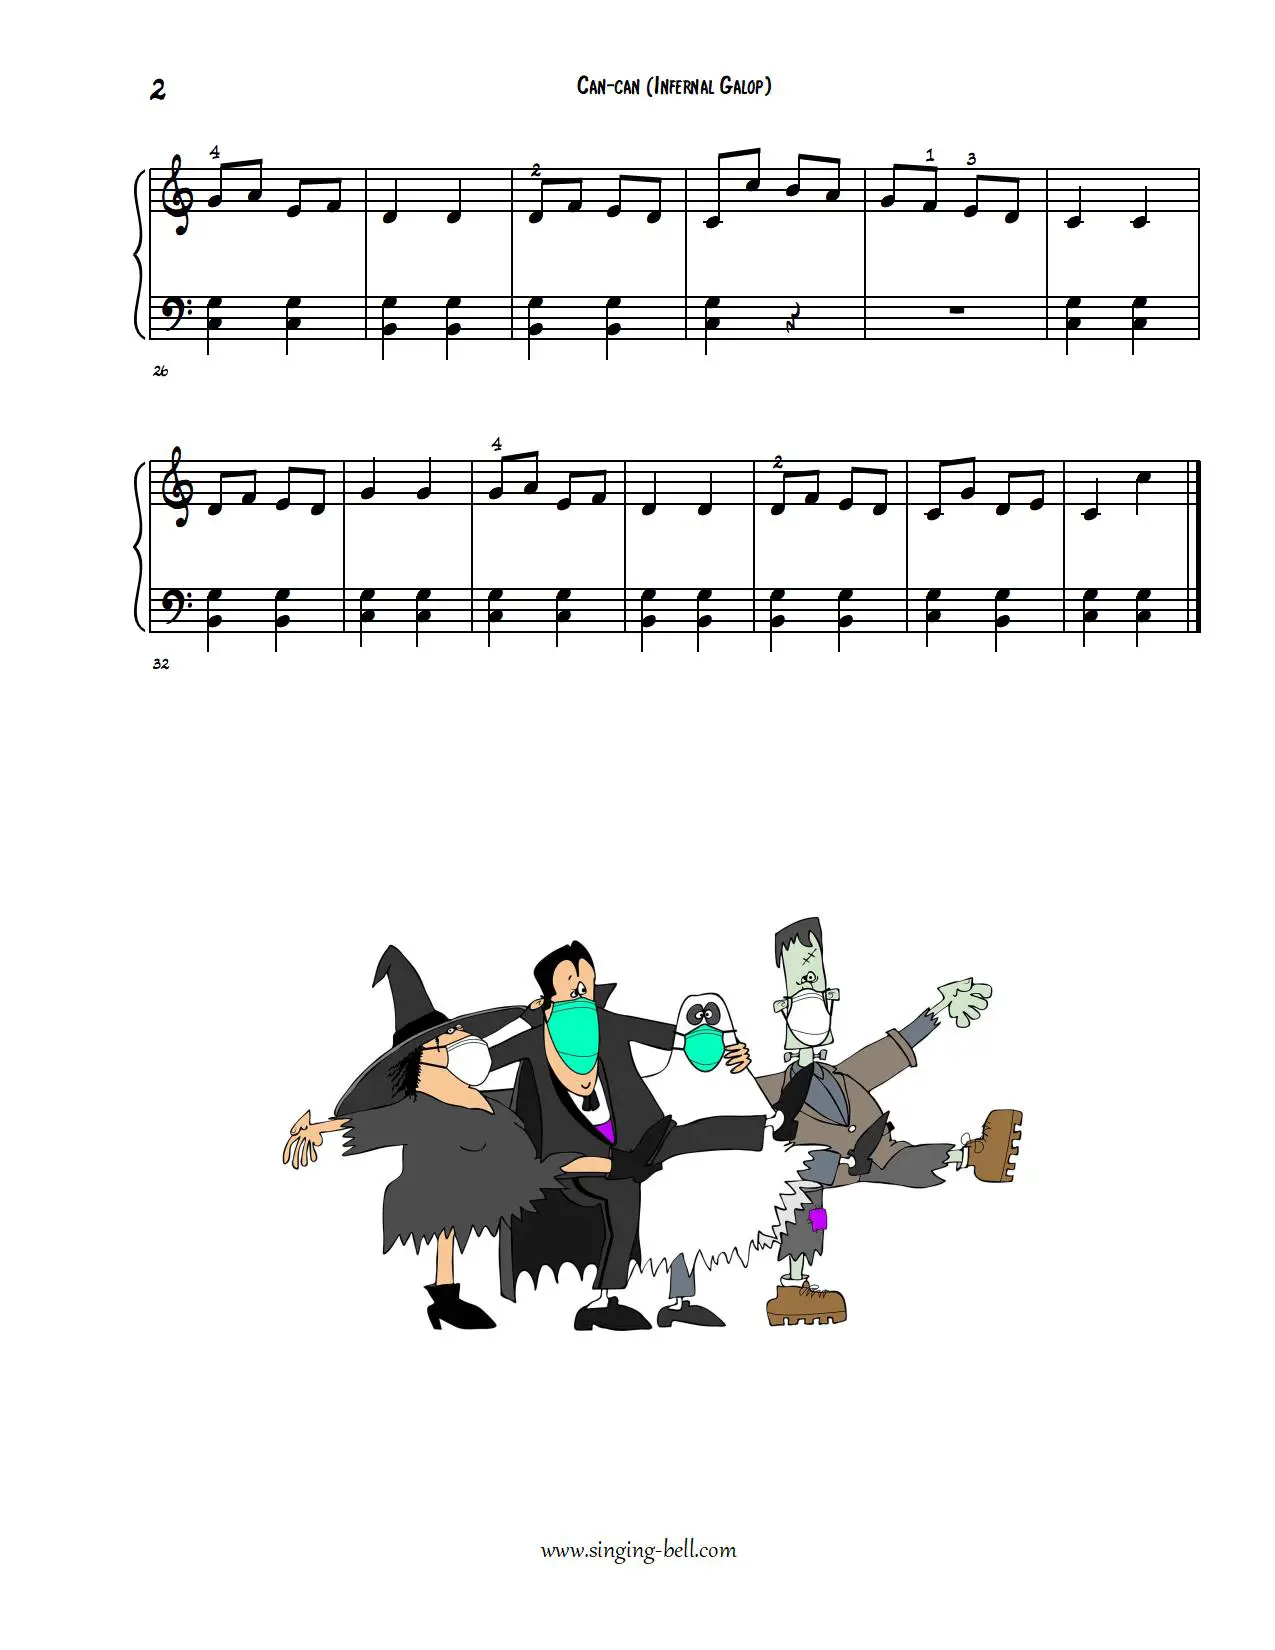 Jacques Offenbach Can-Can Infernal Dance easy piano sheet music p.2 notes beginners pdf